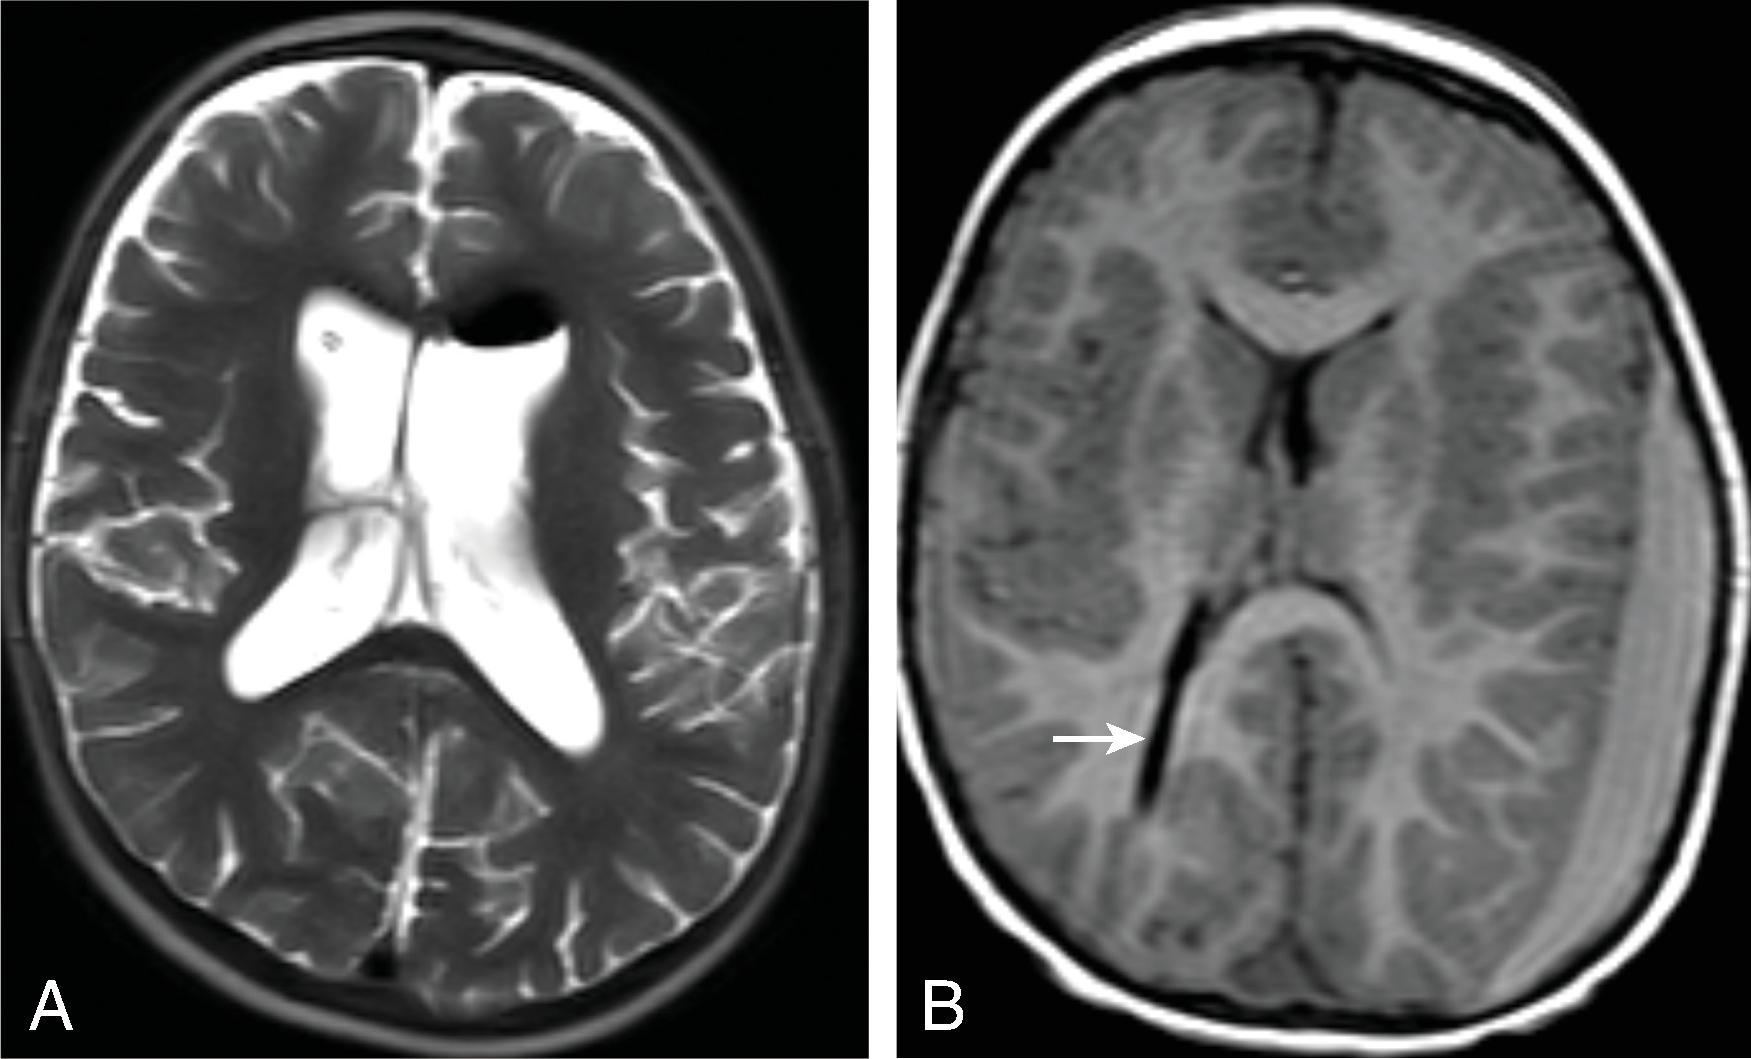 Fig. 11.16, Shunt Complication . (A) Axial T2W image at time of initial shunt placement. Air in the frontal horn of the left lateral ventricle is related to the shunt placement. (B) Follow-up MRI axial T1W image demonstrates an interval decrease in ventricular size, nearly slit-like, and development of a T1W hyperintense left lateral subdural hematoma caused by over shunting of CSF.